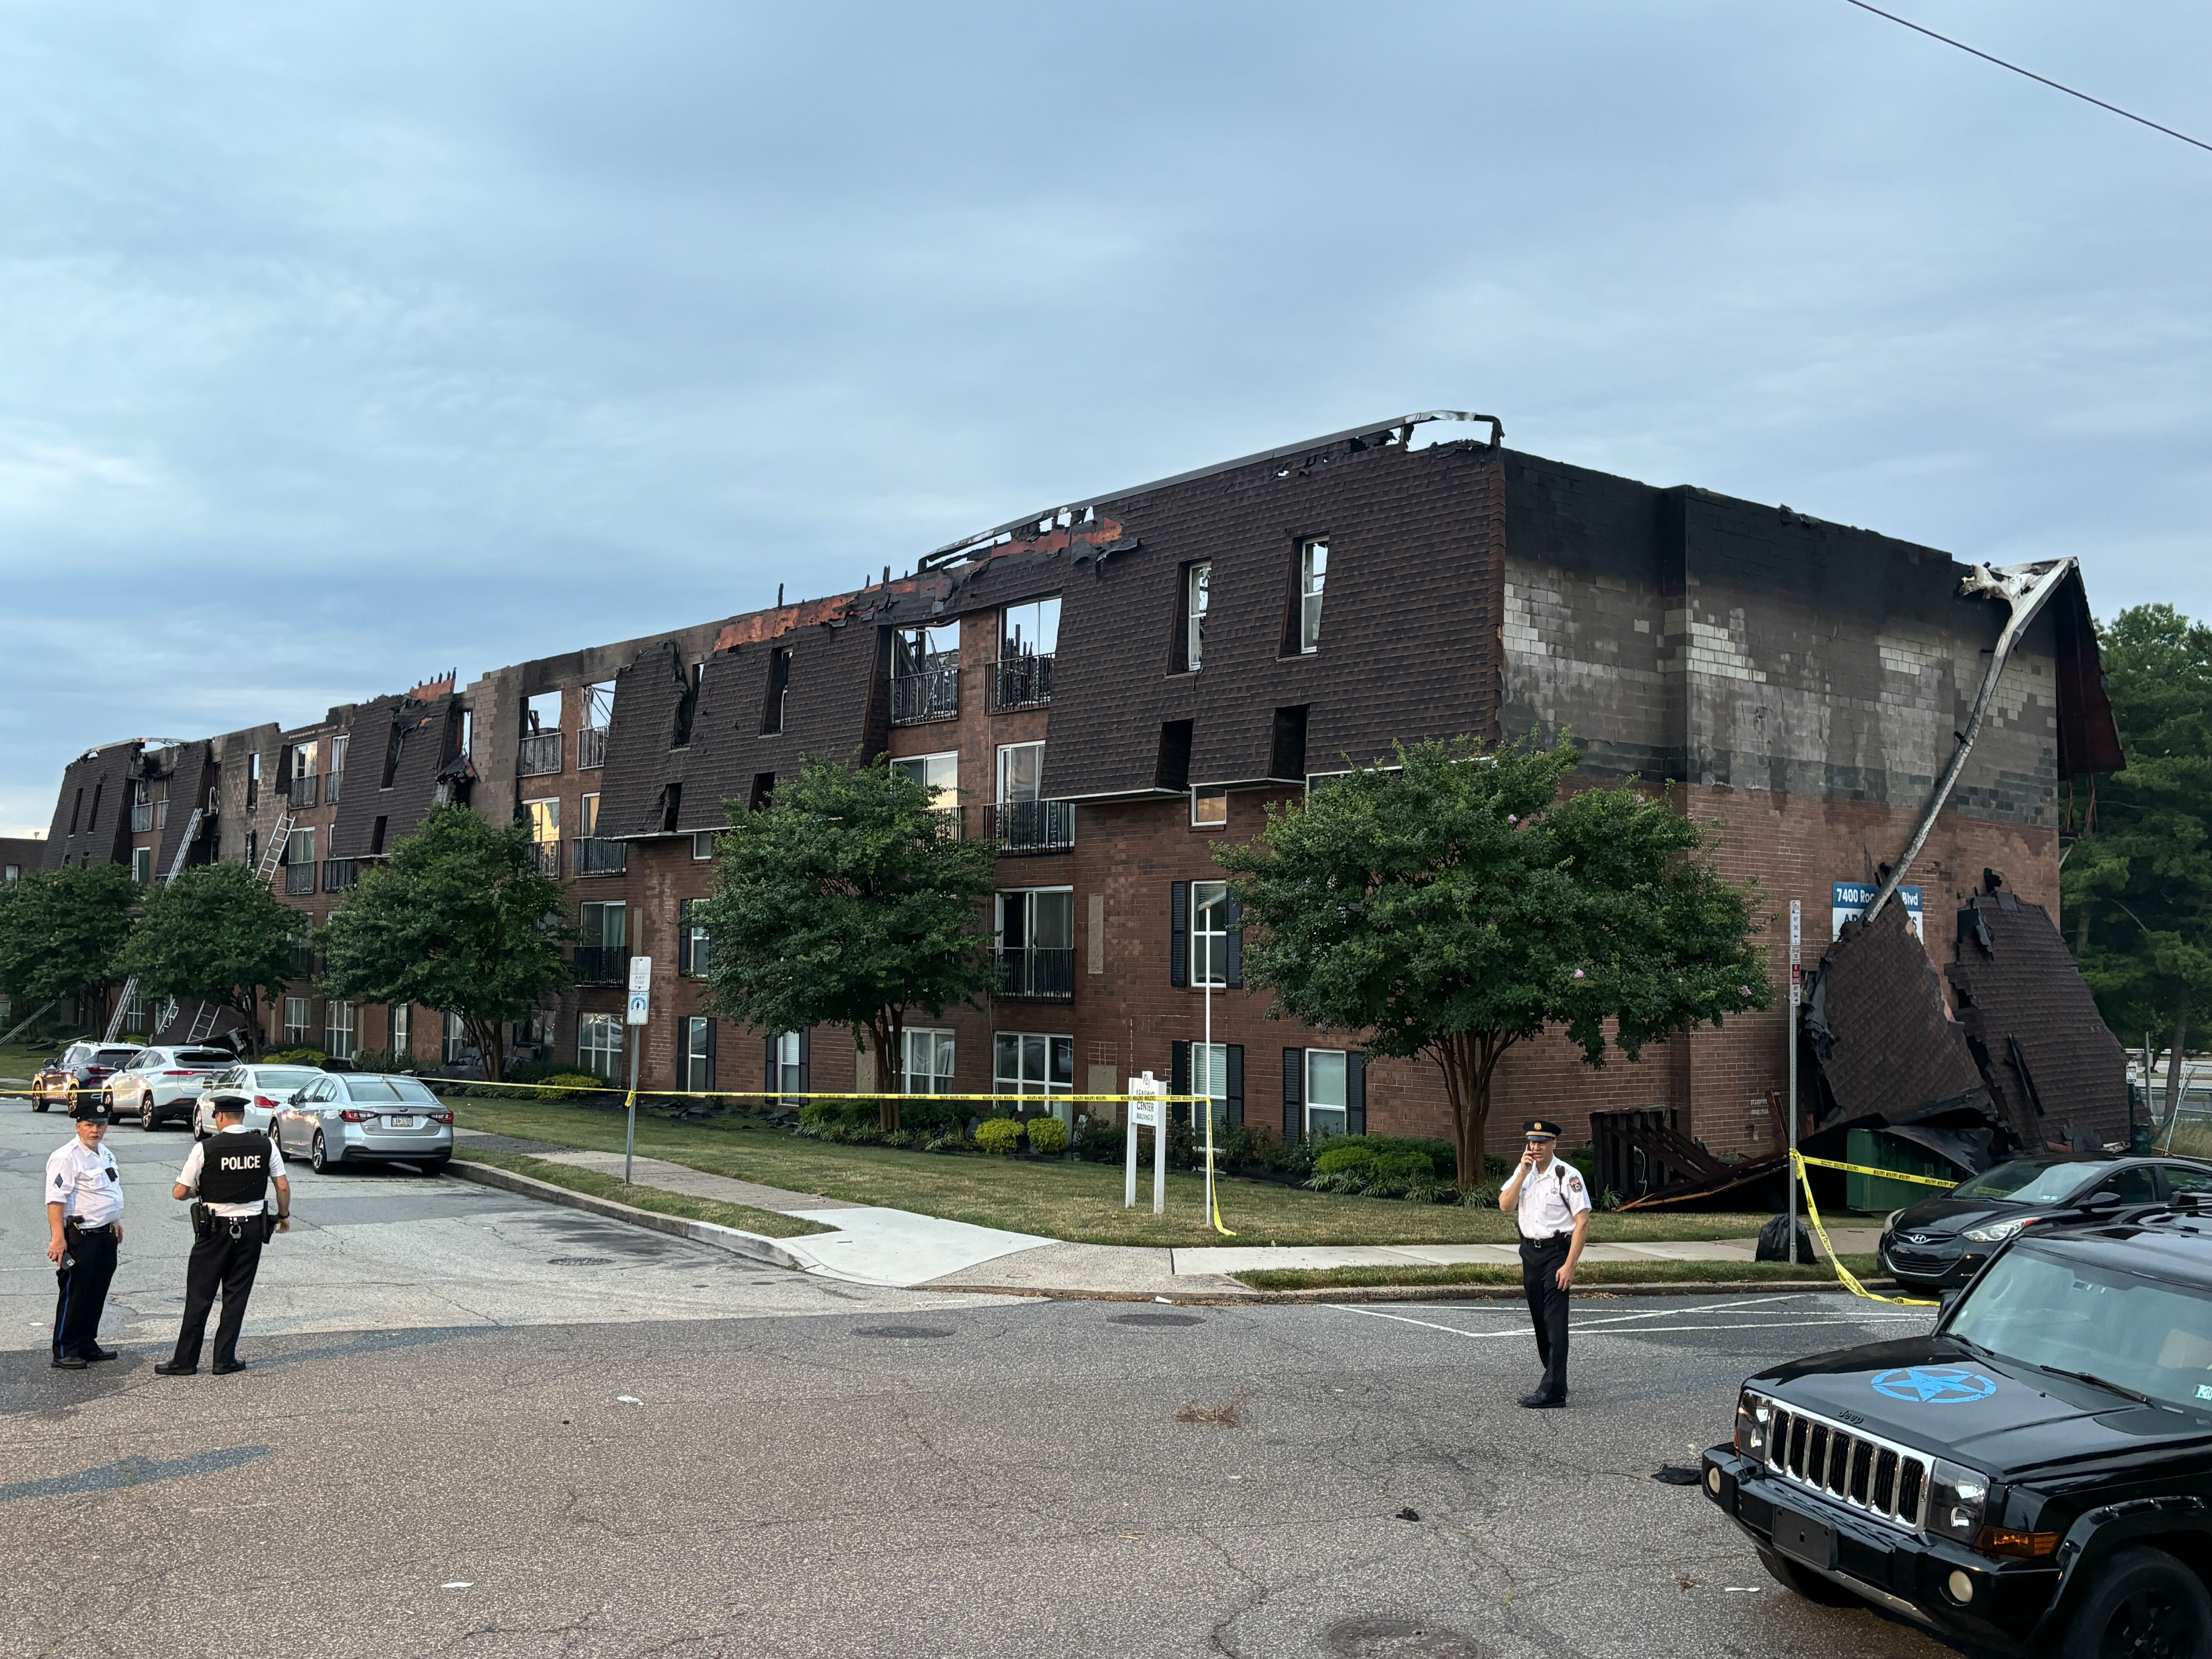 4-alarm fire displaces dozens of residents from Rhawnhurst apartment building